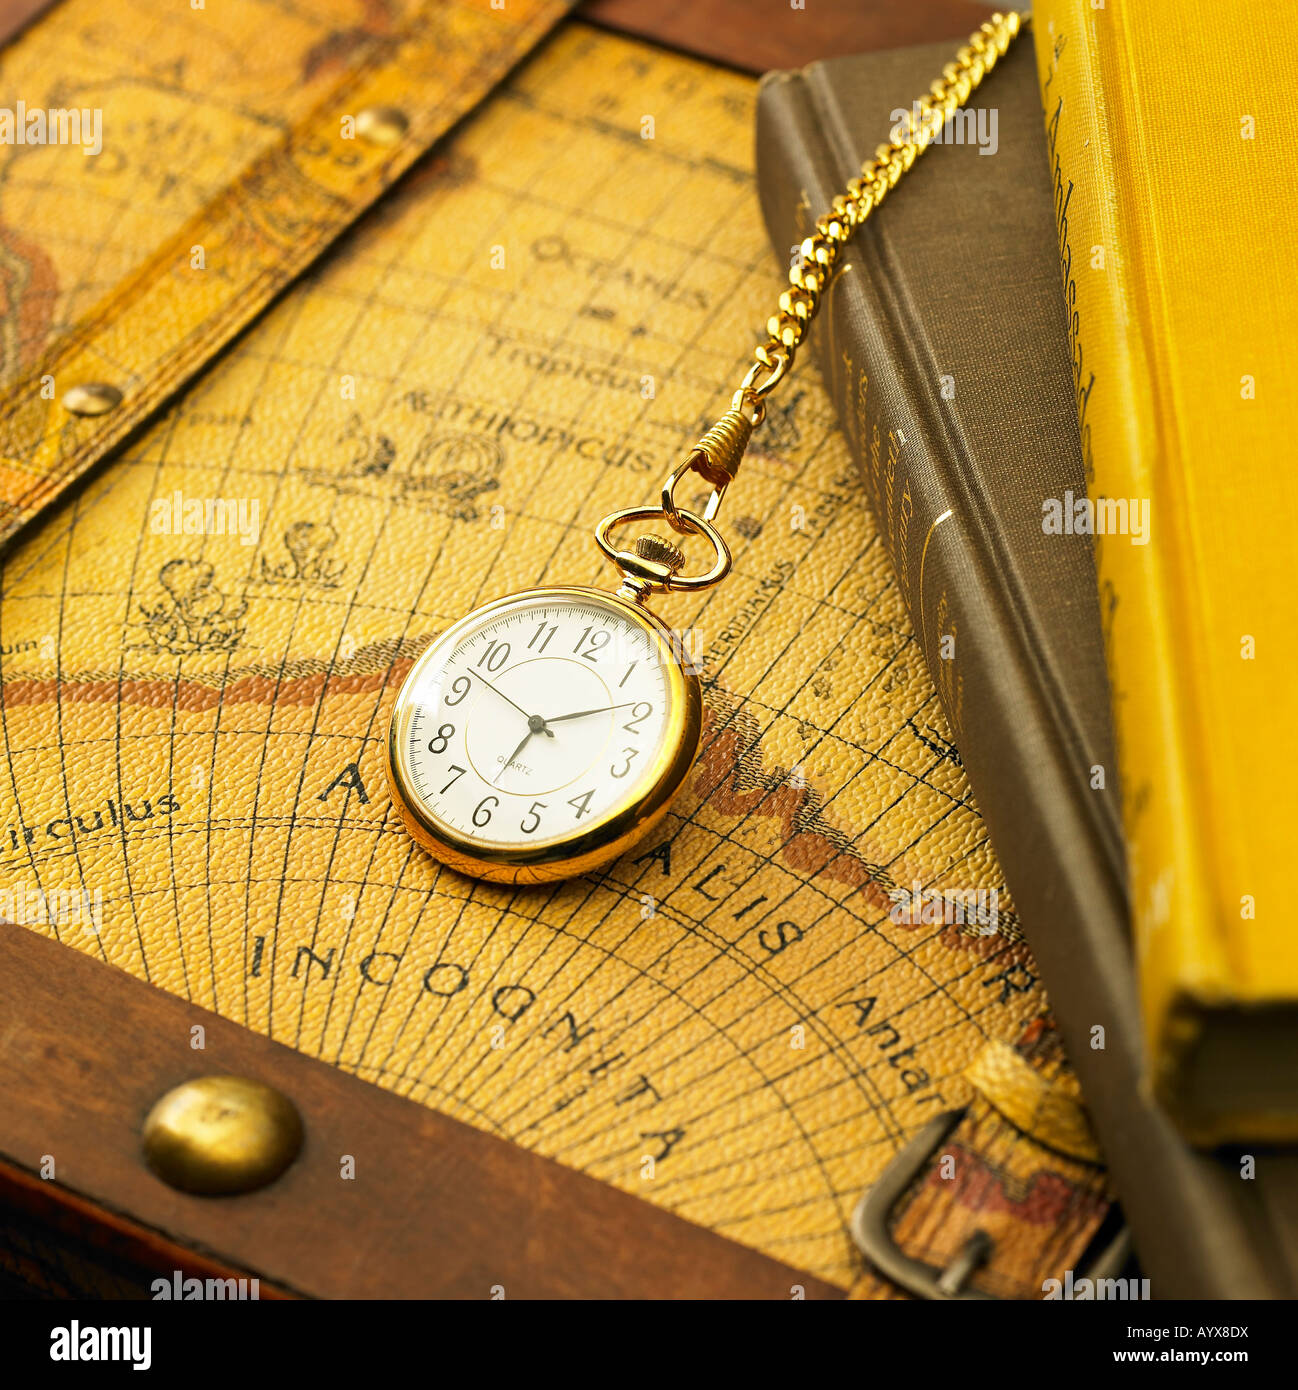 watch and book Stock Photo